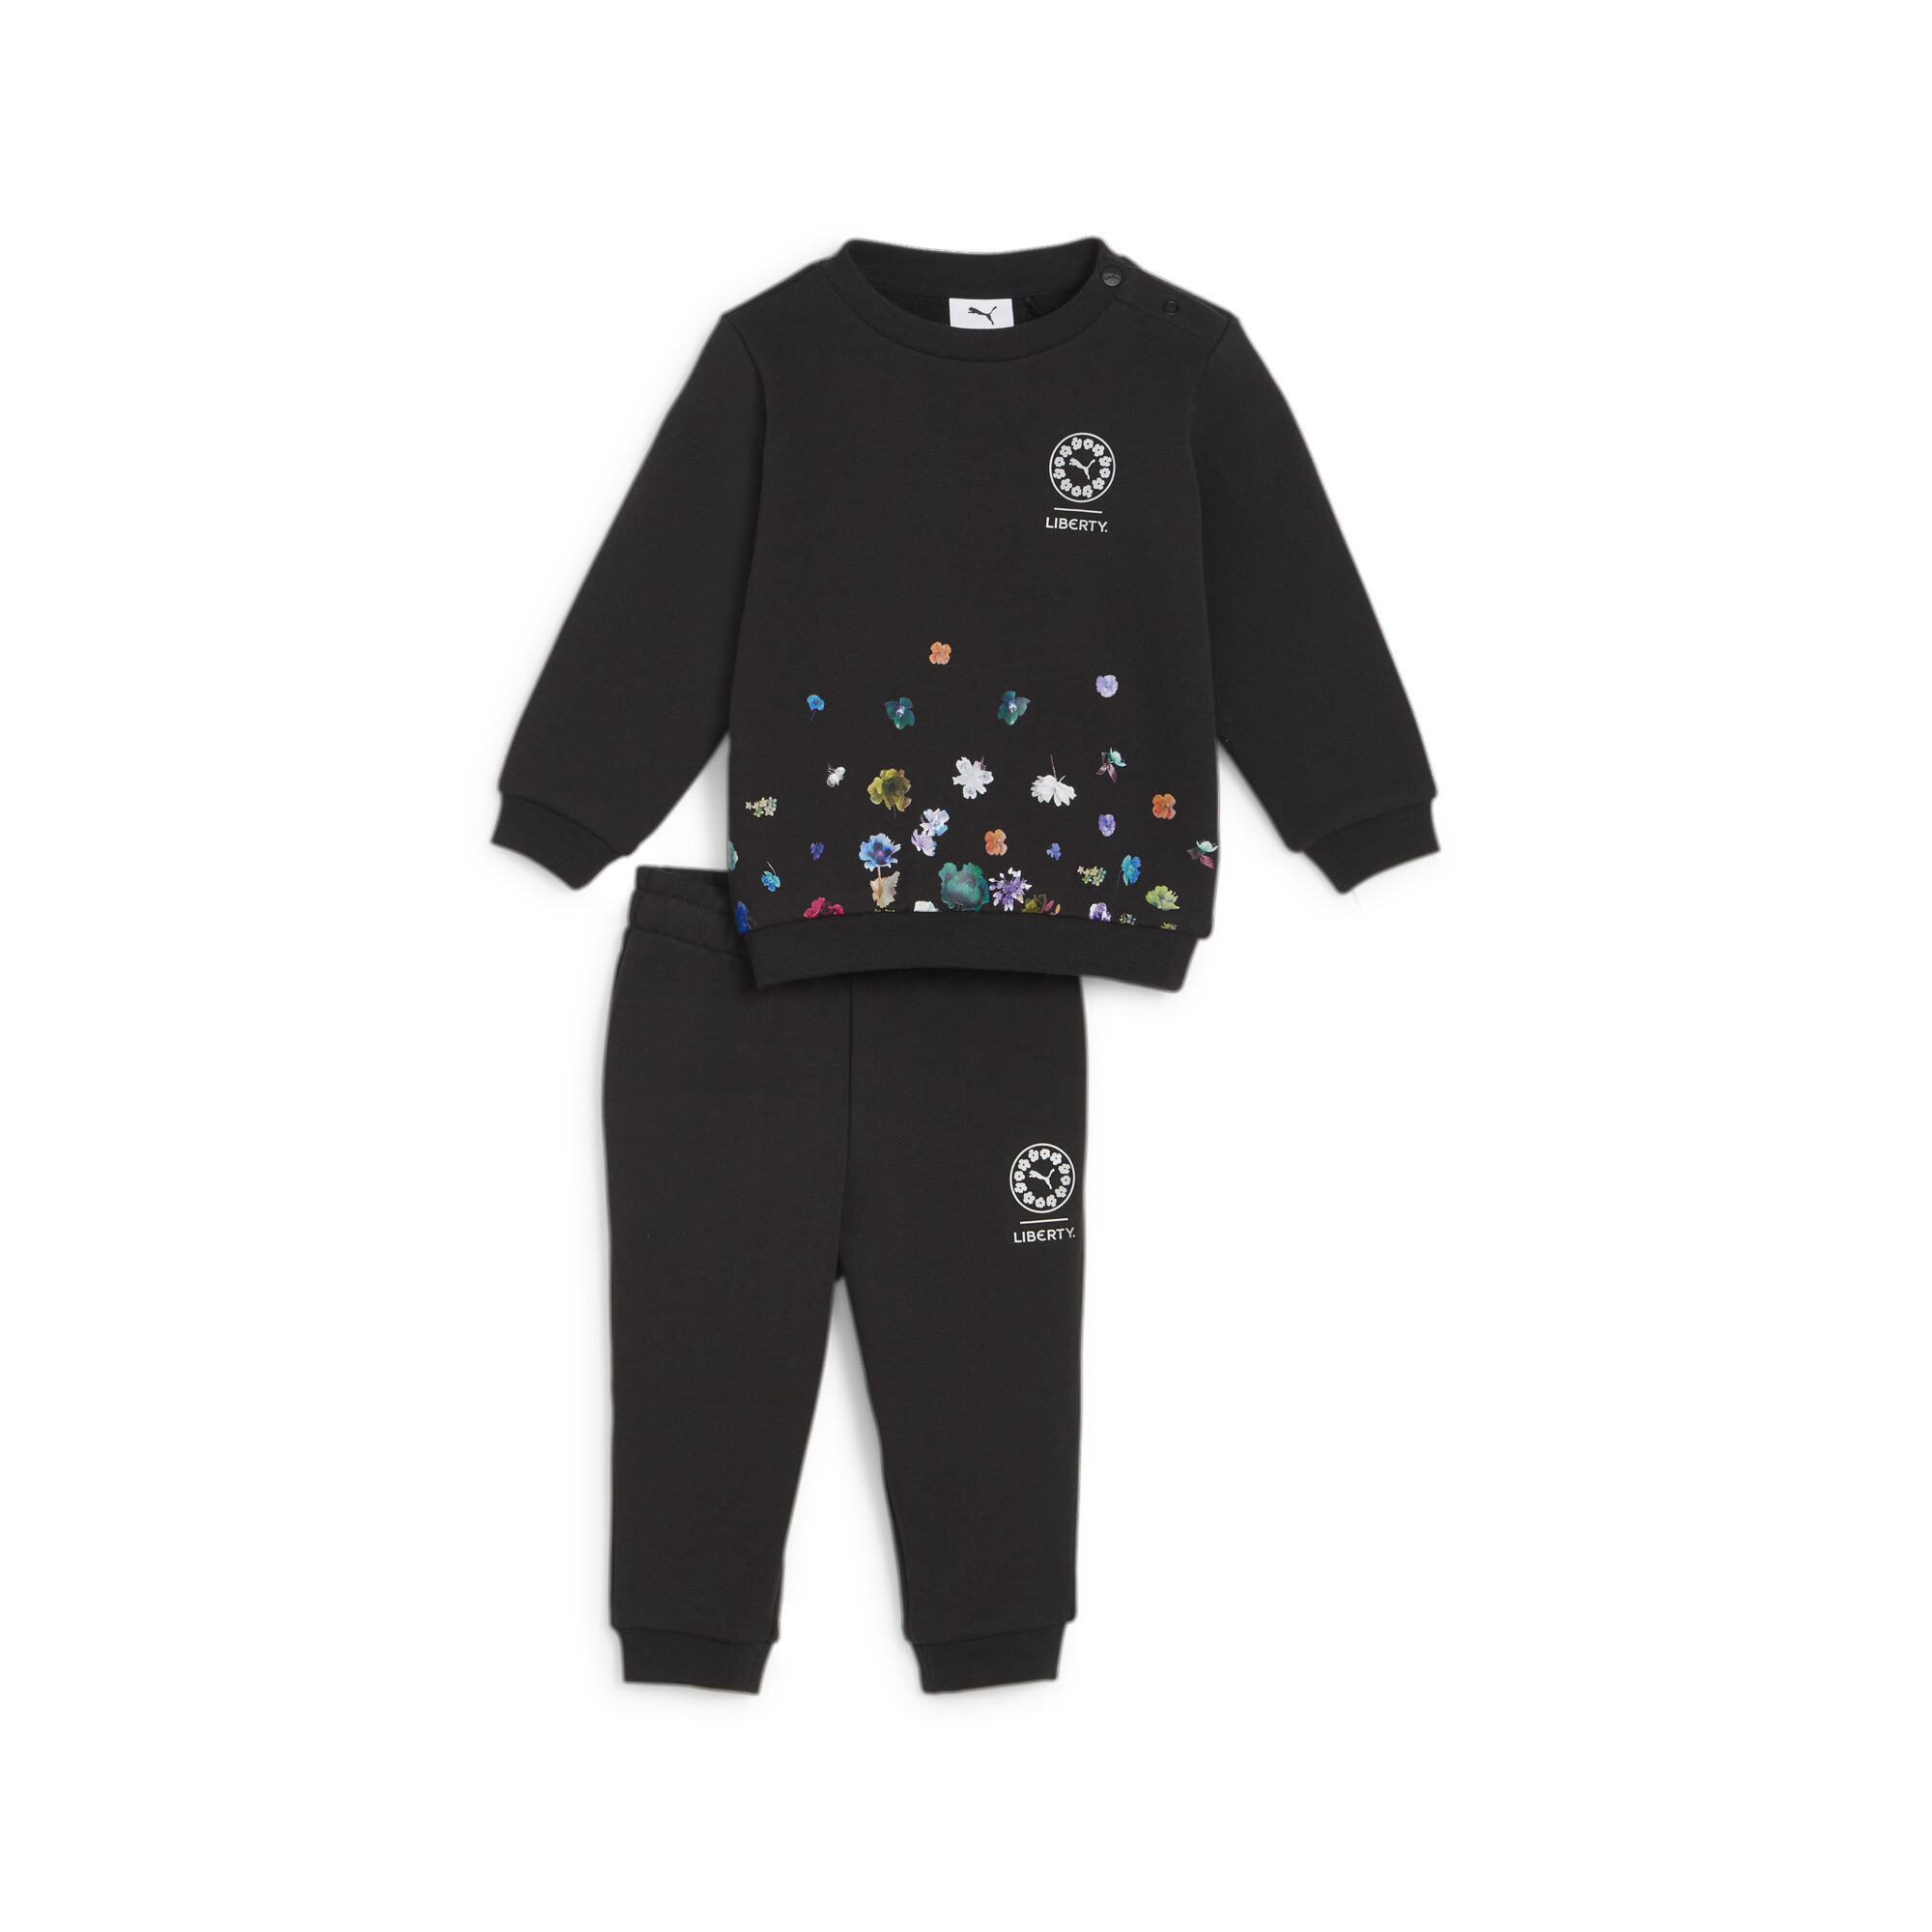 Kids' PUMA X LIBERTY Toddlers' Jogger Set In Black, Size 6-9 Months